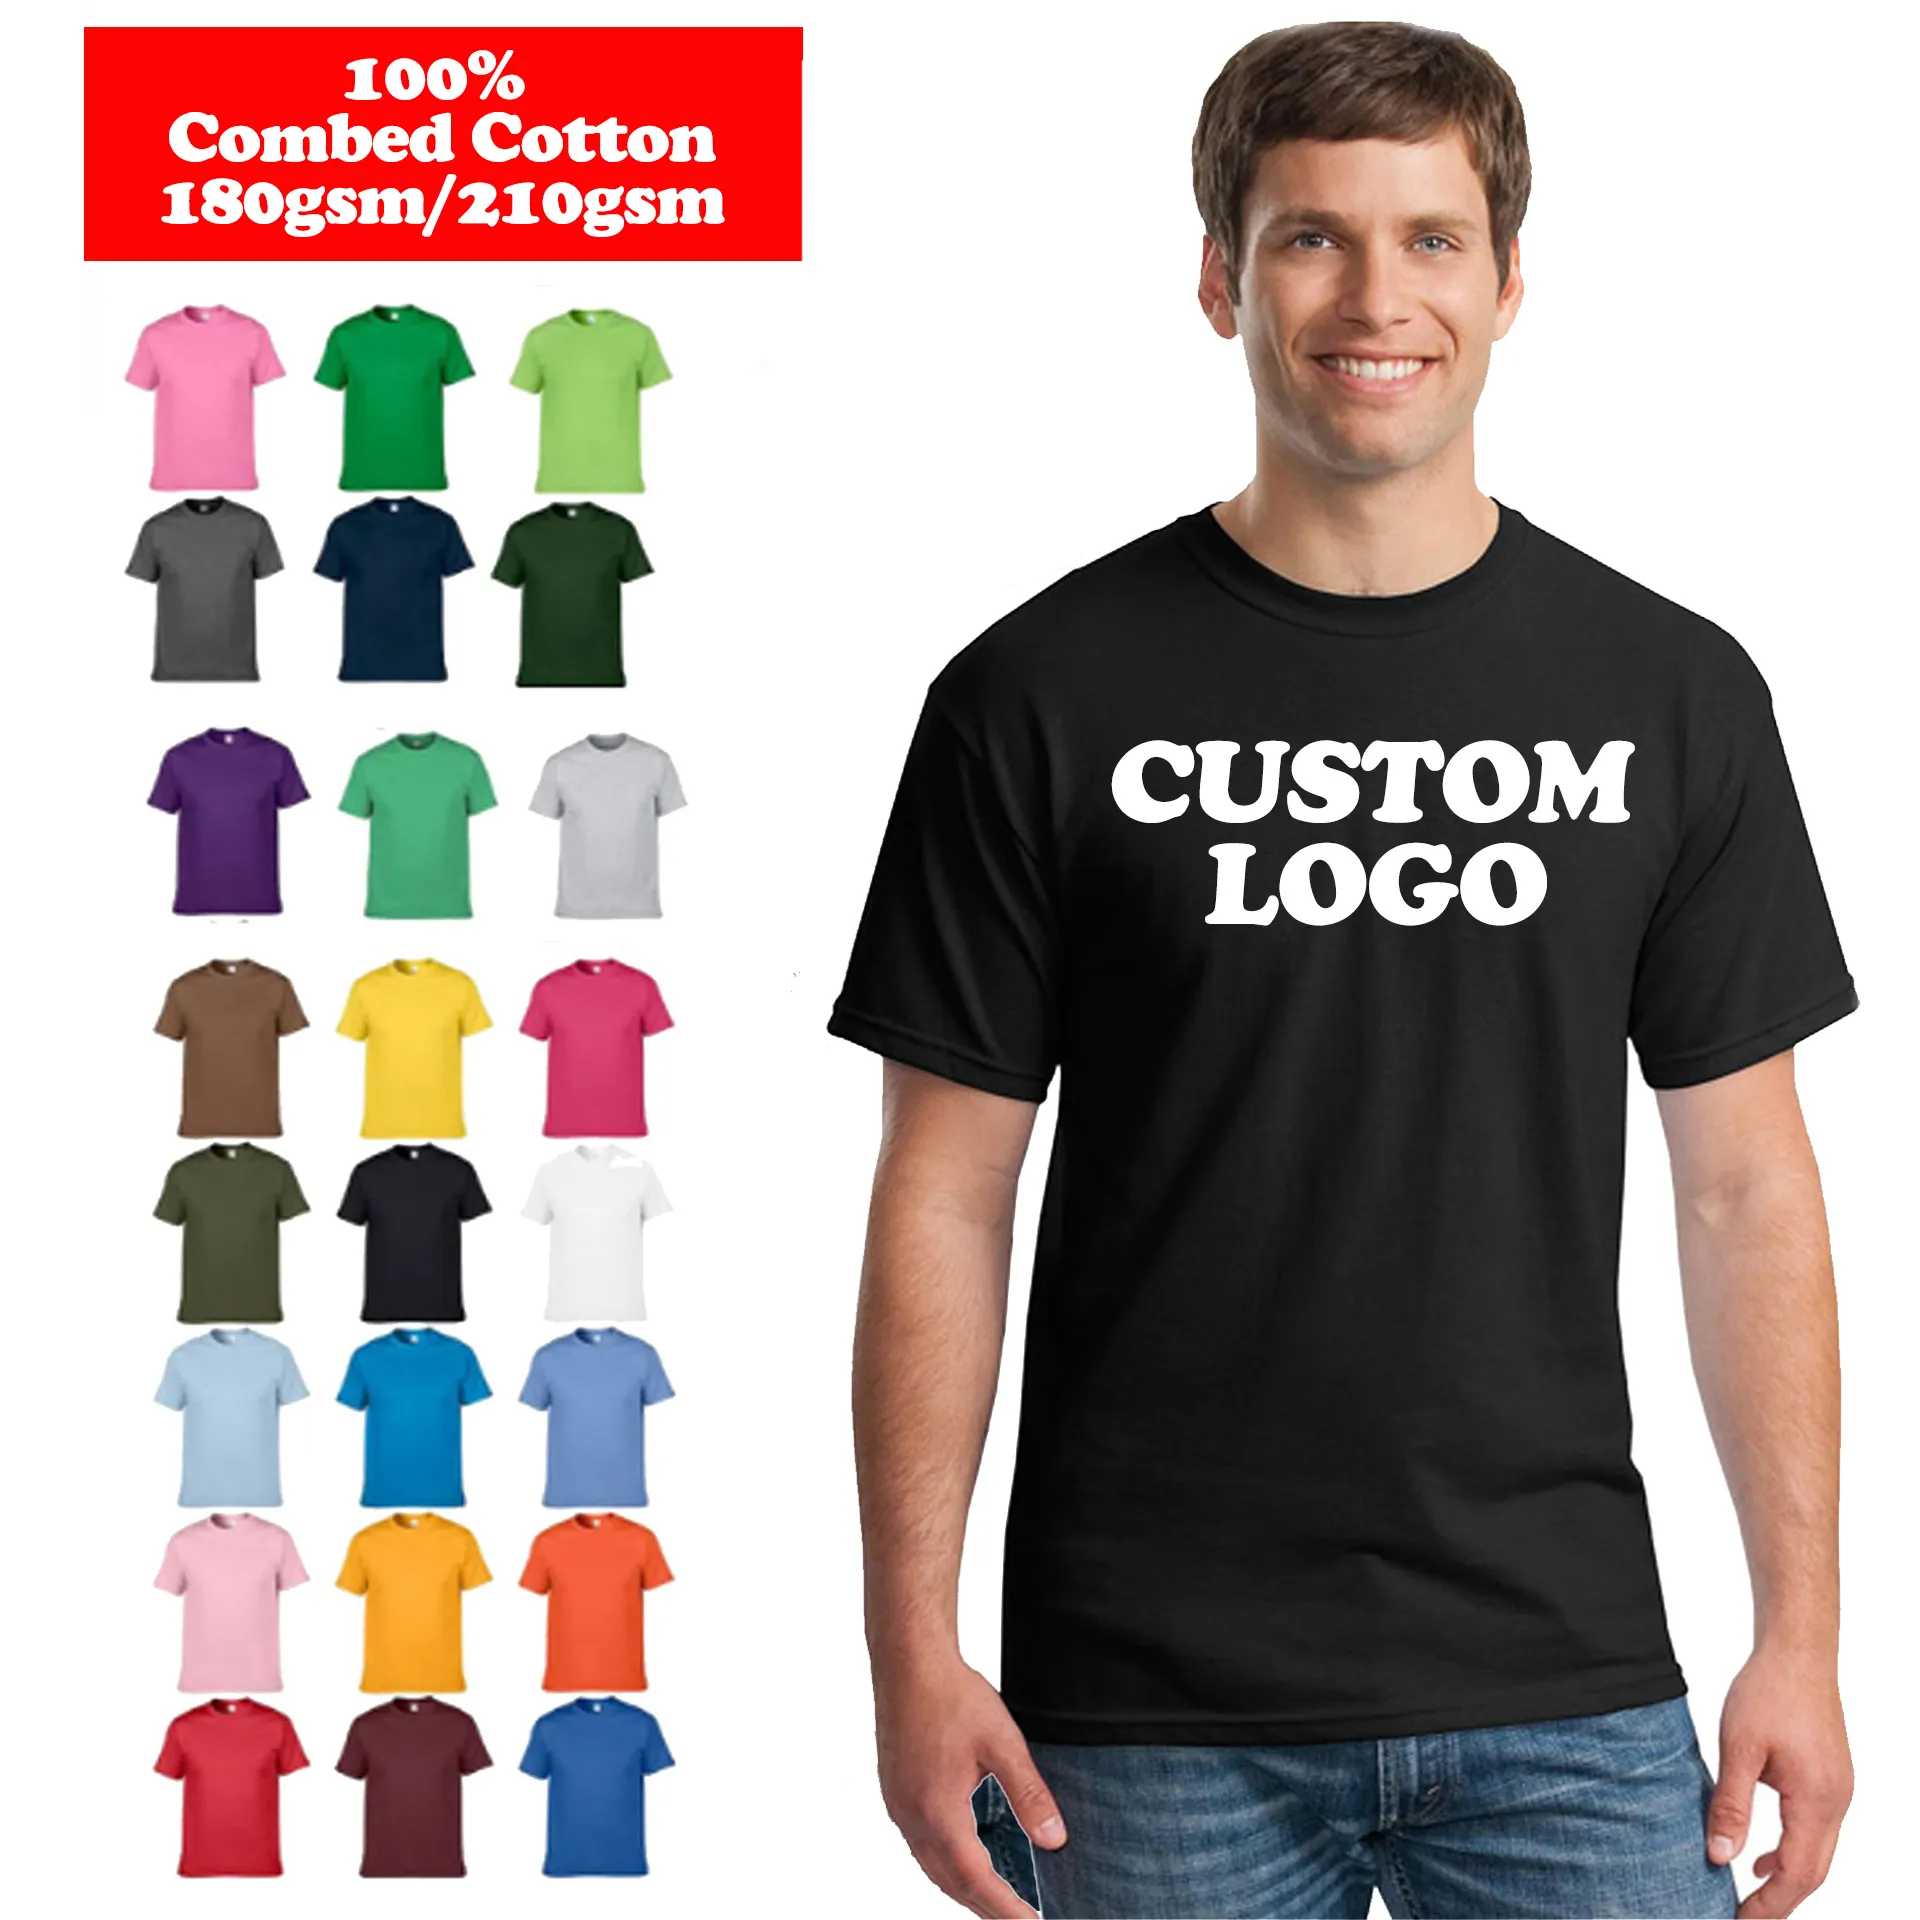 Mens And Womens Print On Demand T Shirt With Custom Logo